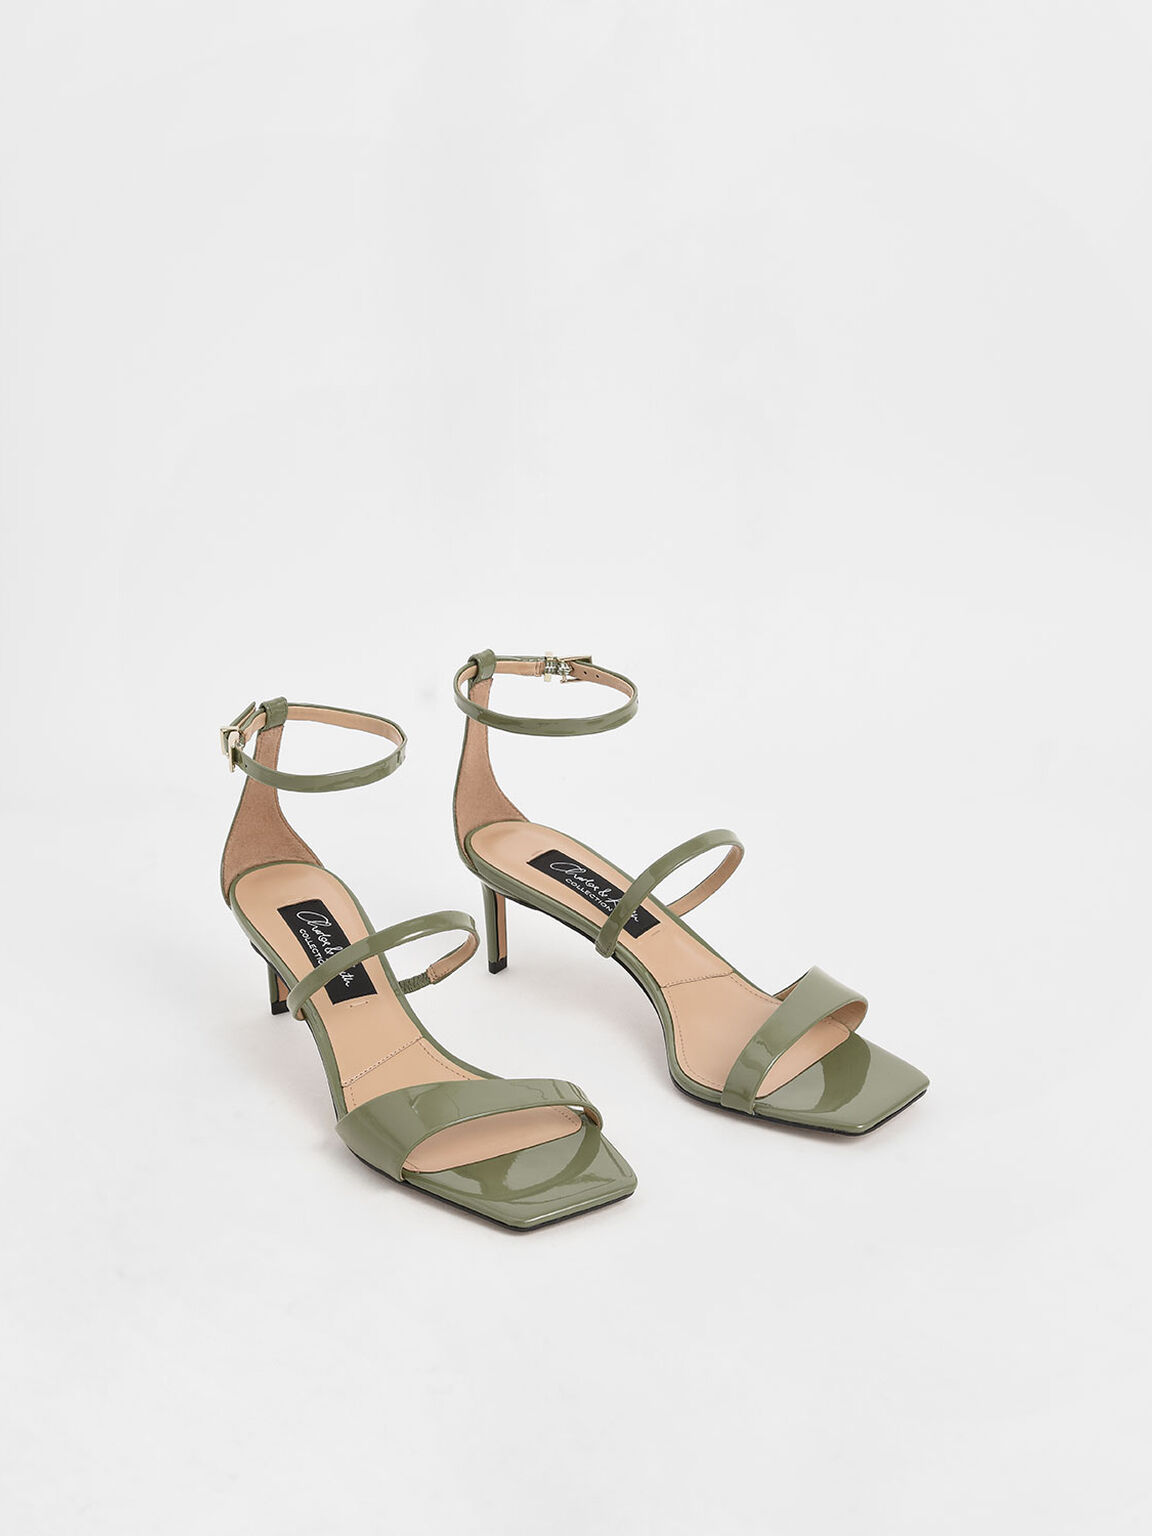 Patent Leather Strappy Heeled Sandals, Green, hi-res